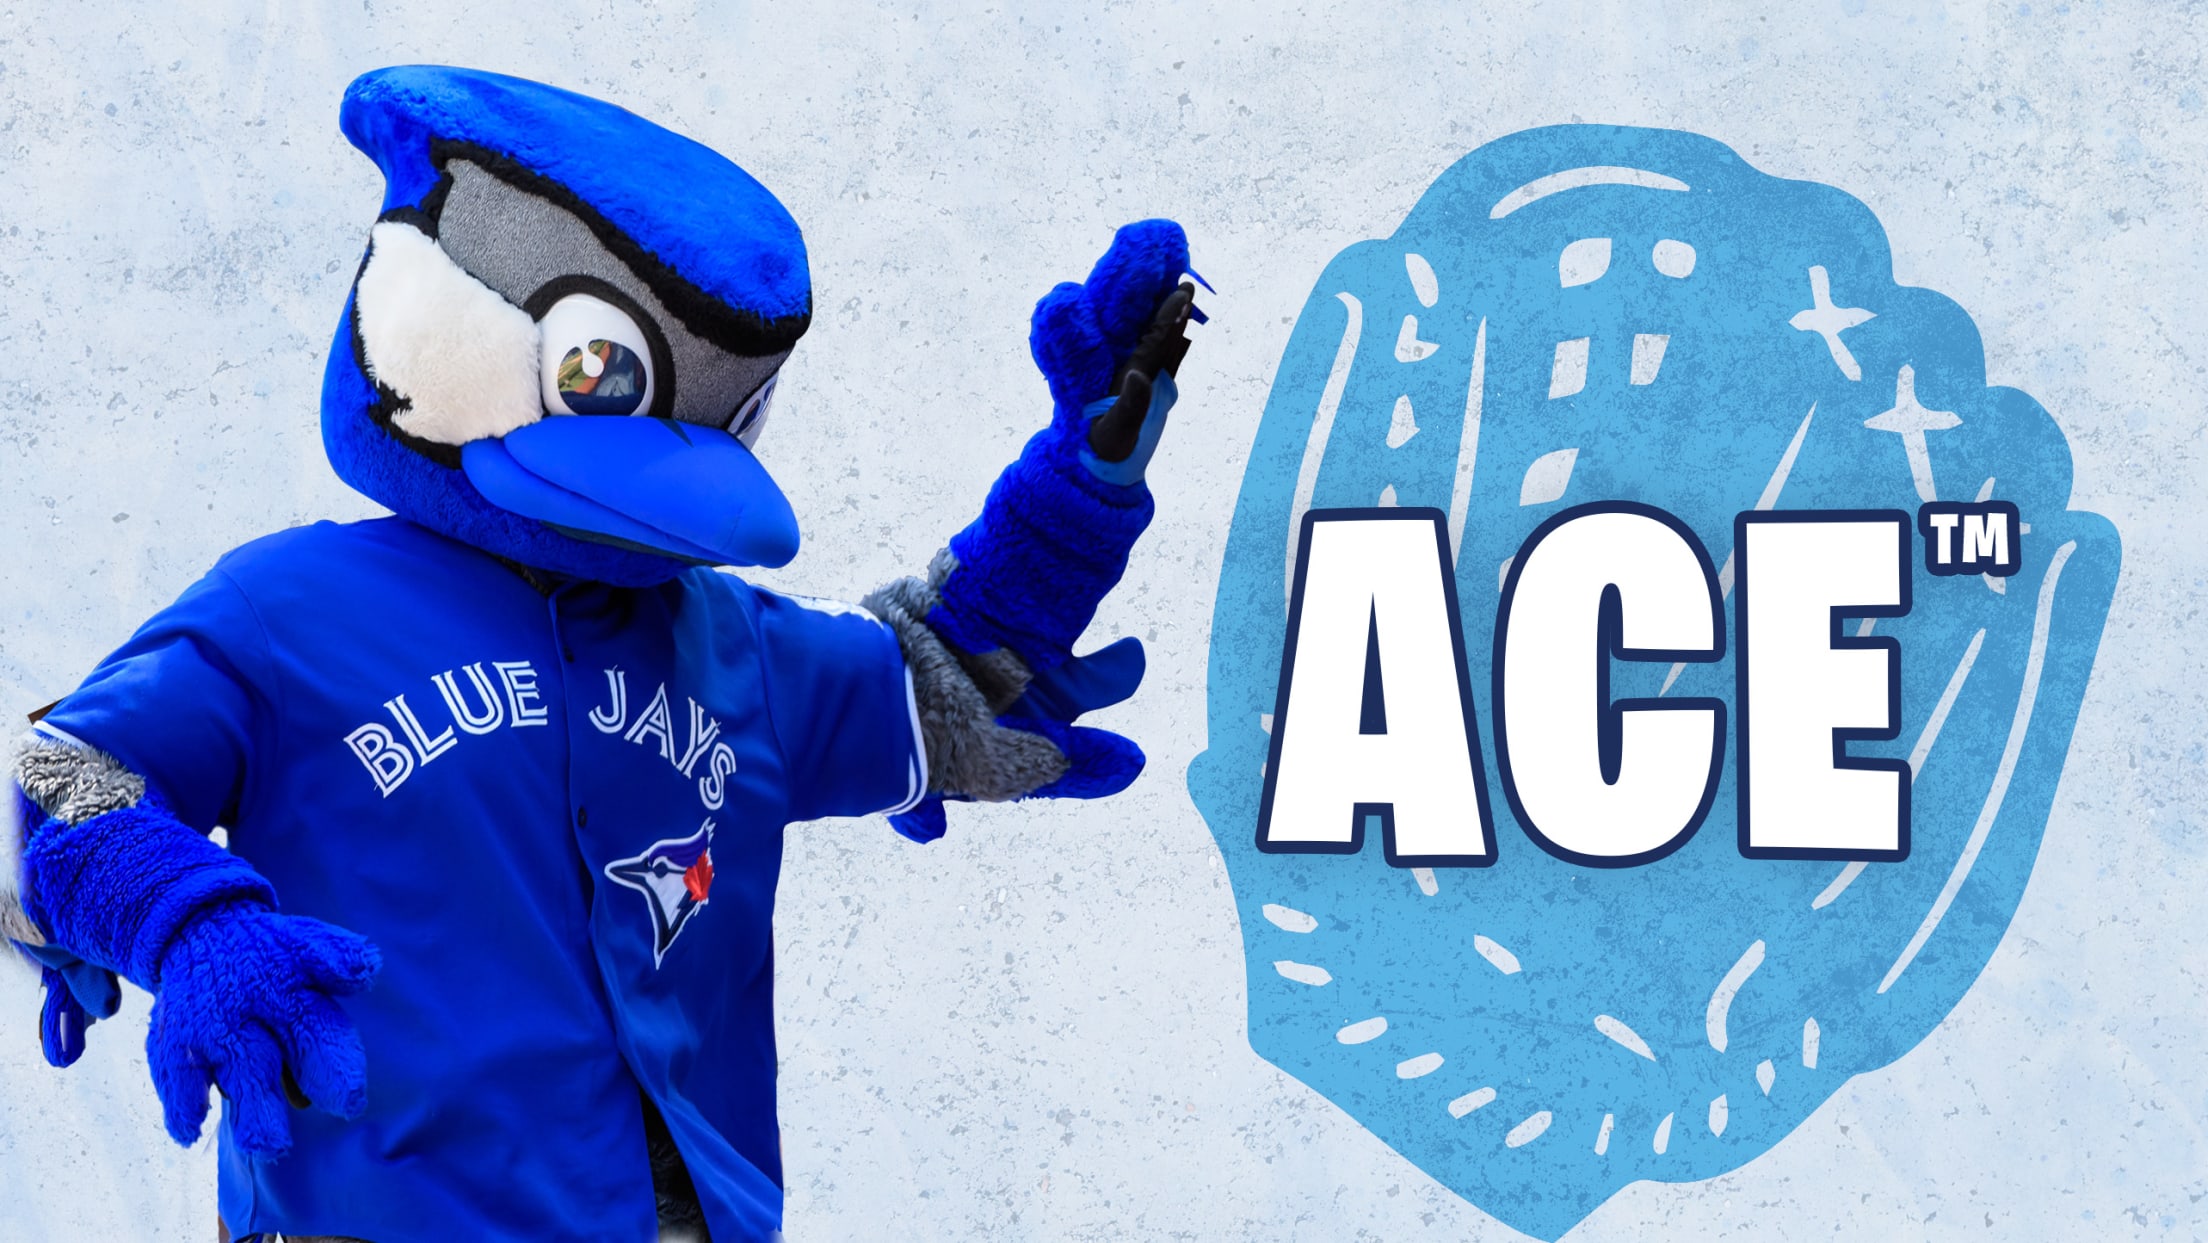 The coolest job I ever had was being a Toronto Blue Jays mascot